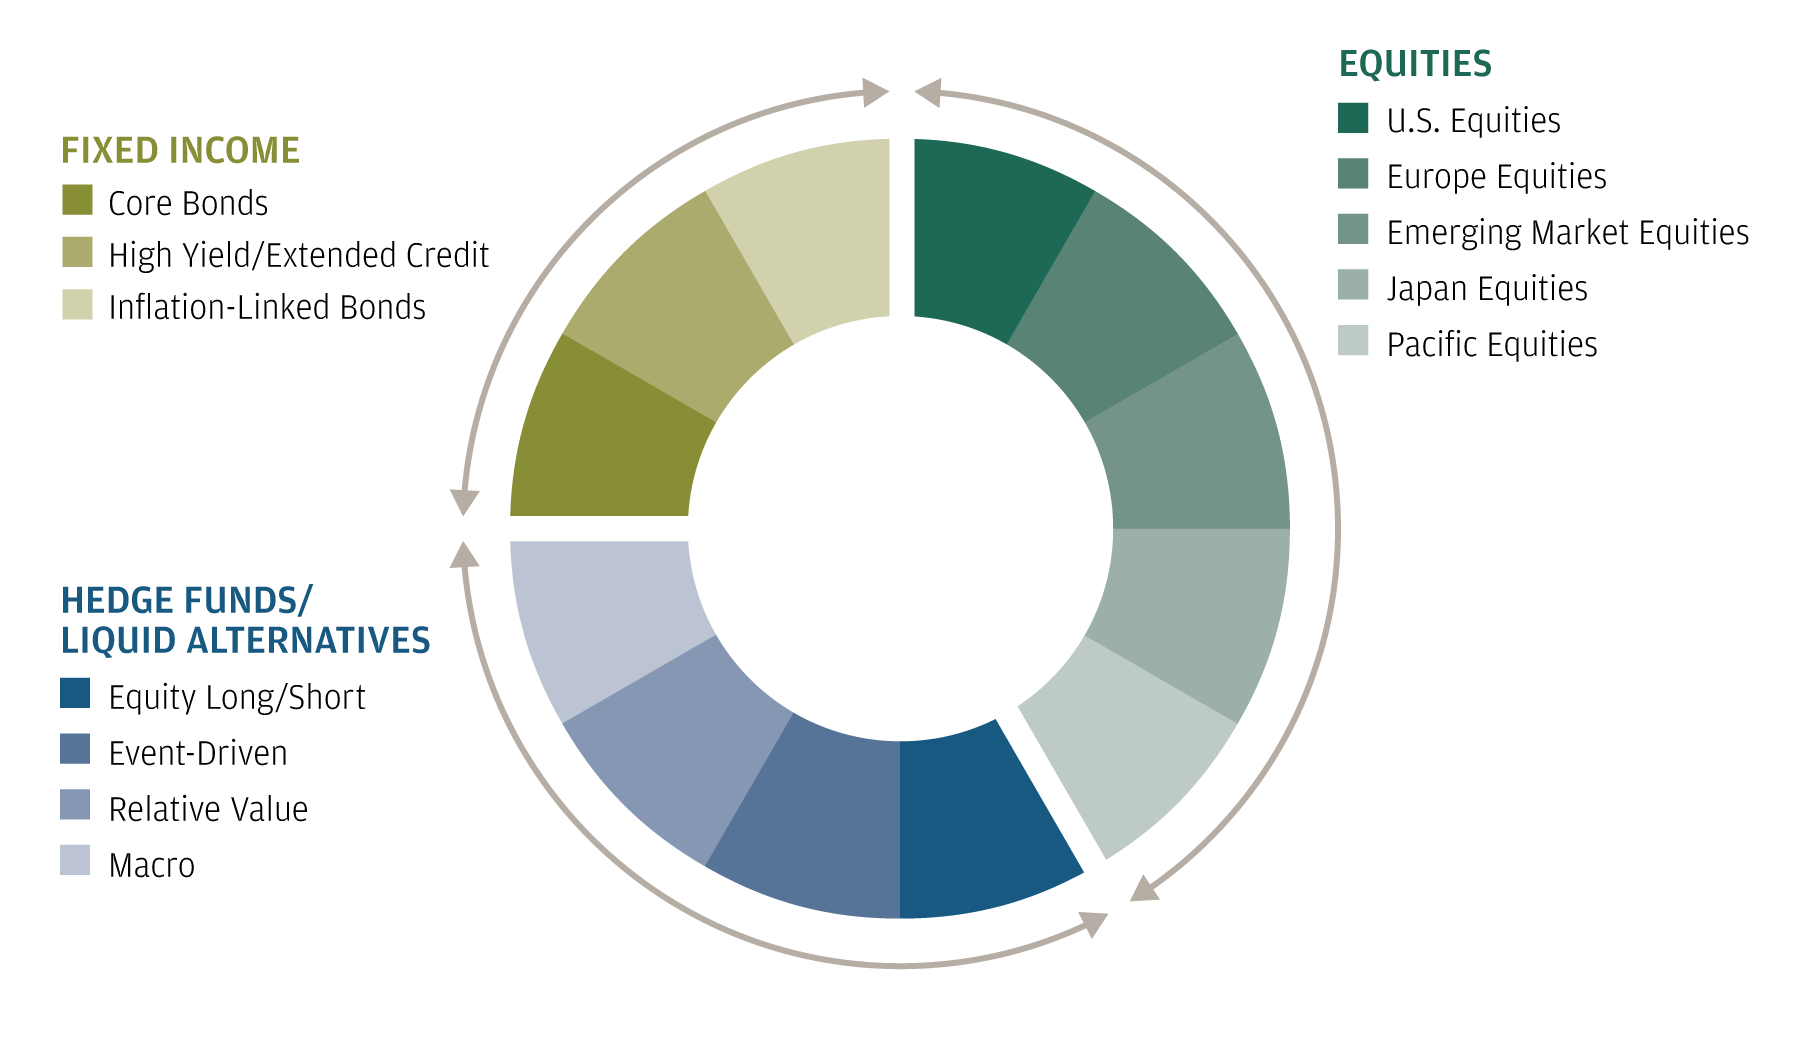 This pie chart divides a hypothetical portfolio into its component asset classes, adhering to the principles of growth, stability and diversification.